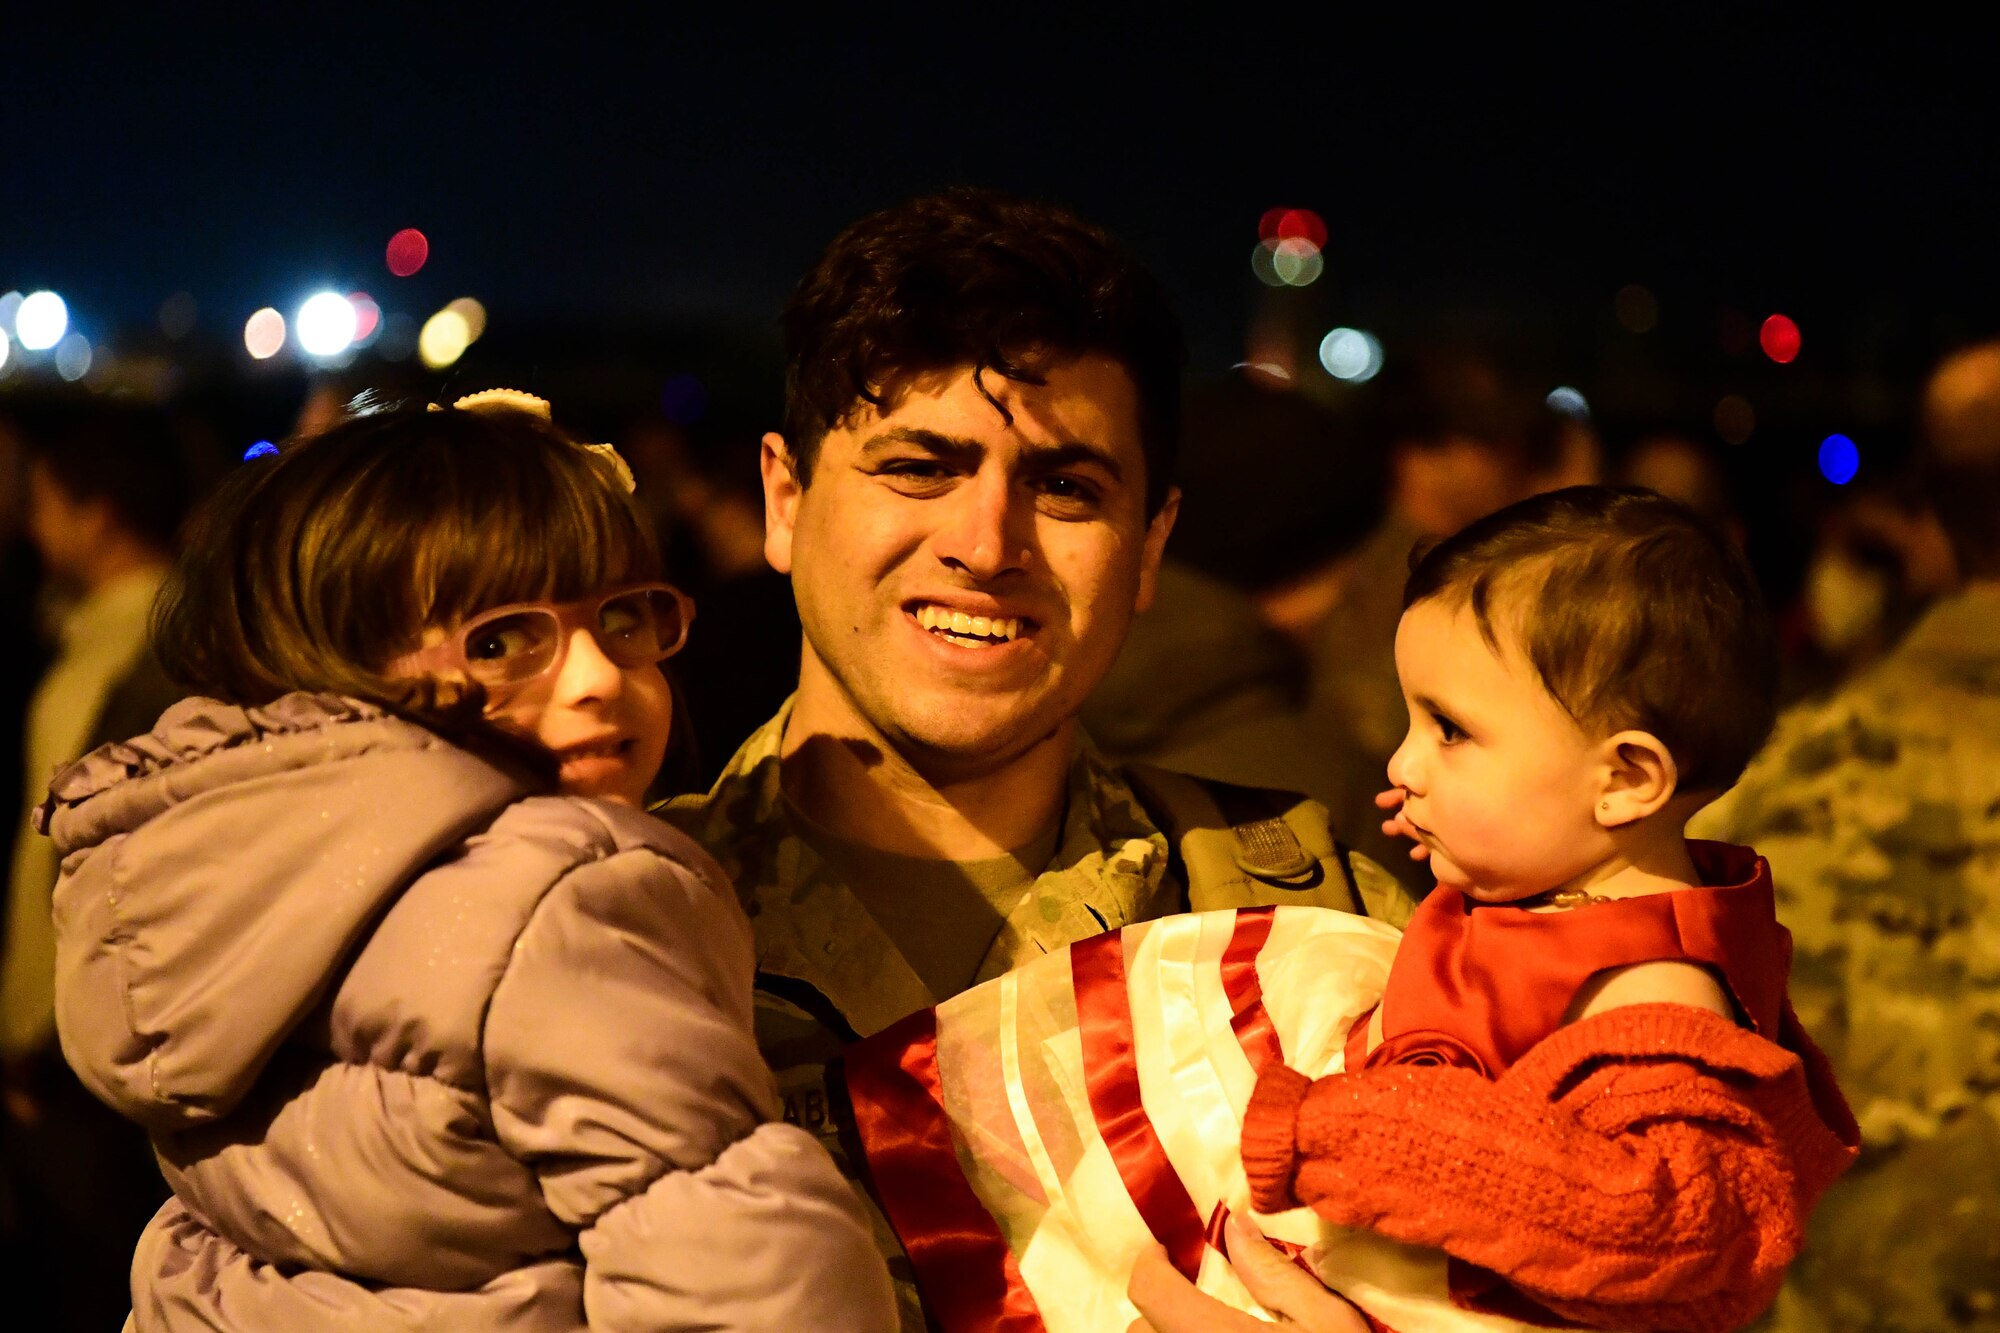 A U.S. Air Force Airman assigned to the 56th Rescue Squadron poses for a photo with his family after returning from a deployment, at Aviano Air Base, Italy, Feb. 9, 2022. The 56th RQS provides a rapidly-deployable, worldwide combat rescue and reaction force response utilizing HH-60G Pave Hawk helicopters. (U.S. Air Force photo by Senior Airman Noah Sudolcan)